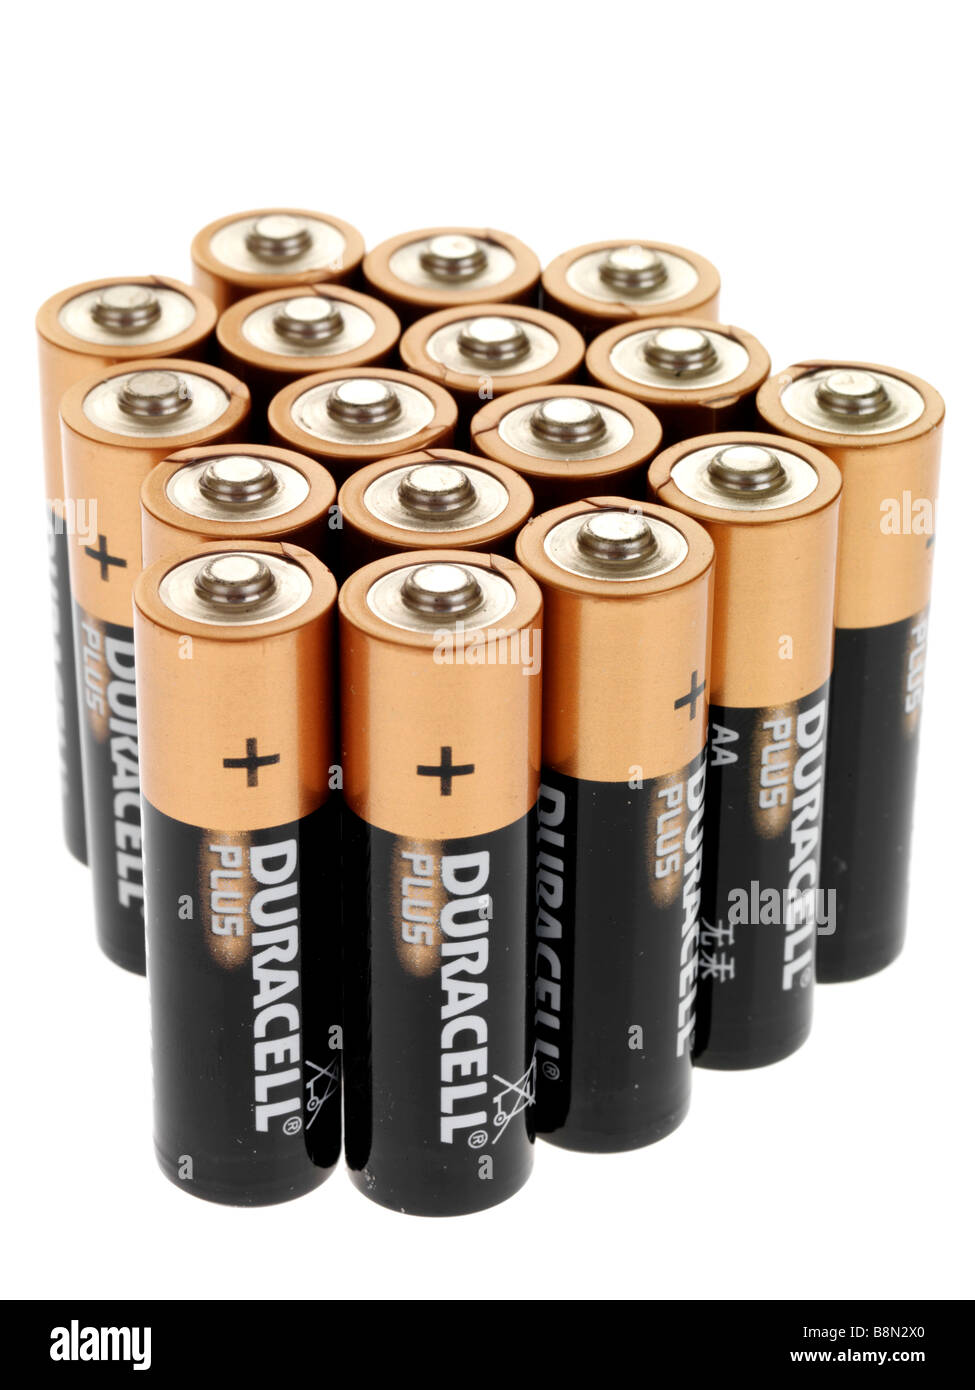 Collection Of AA Size Duracell Plus Energy Batteries Cells Isolated Against A White Background With No People And A Clipping Path Stock Photo